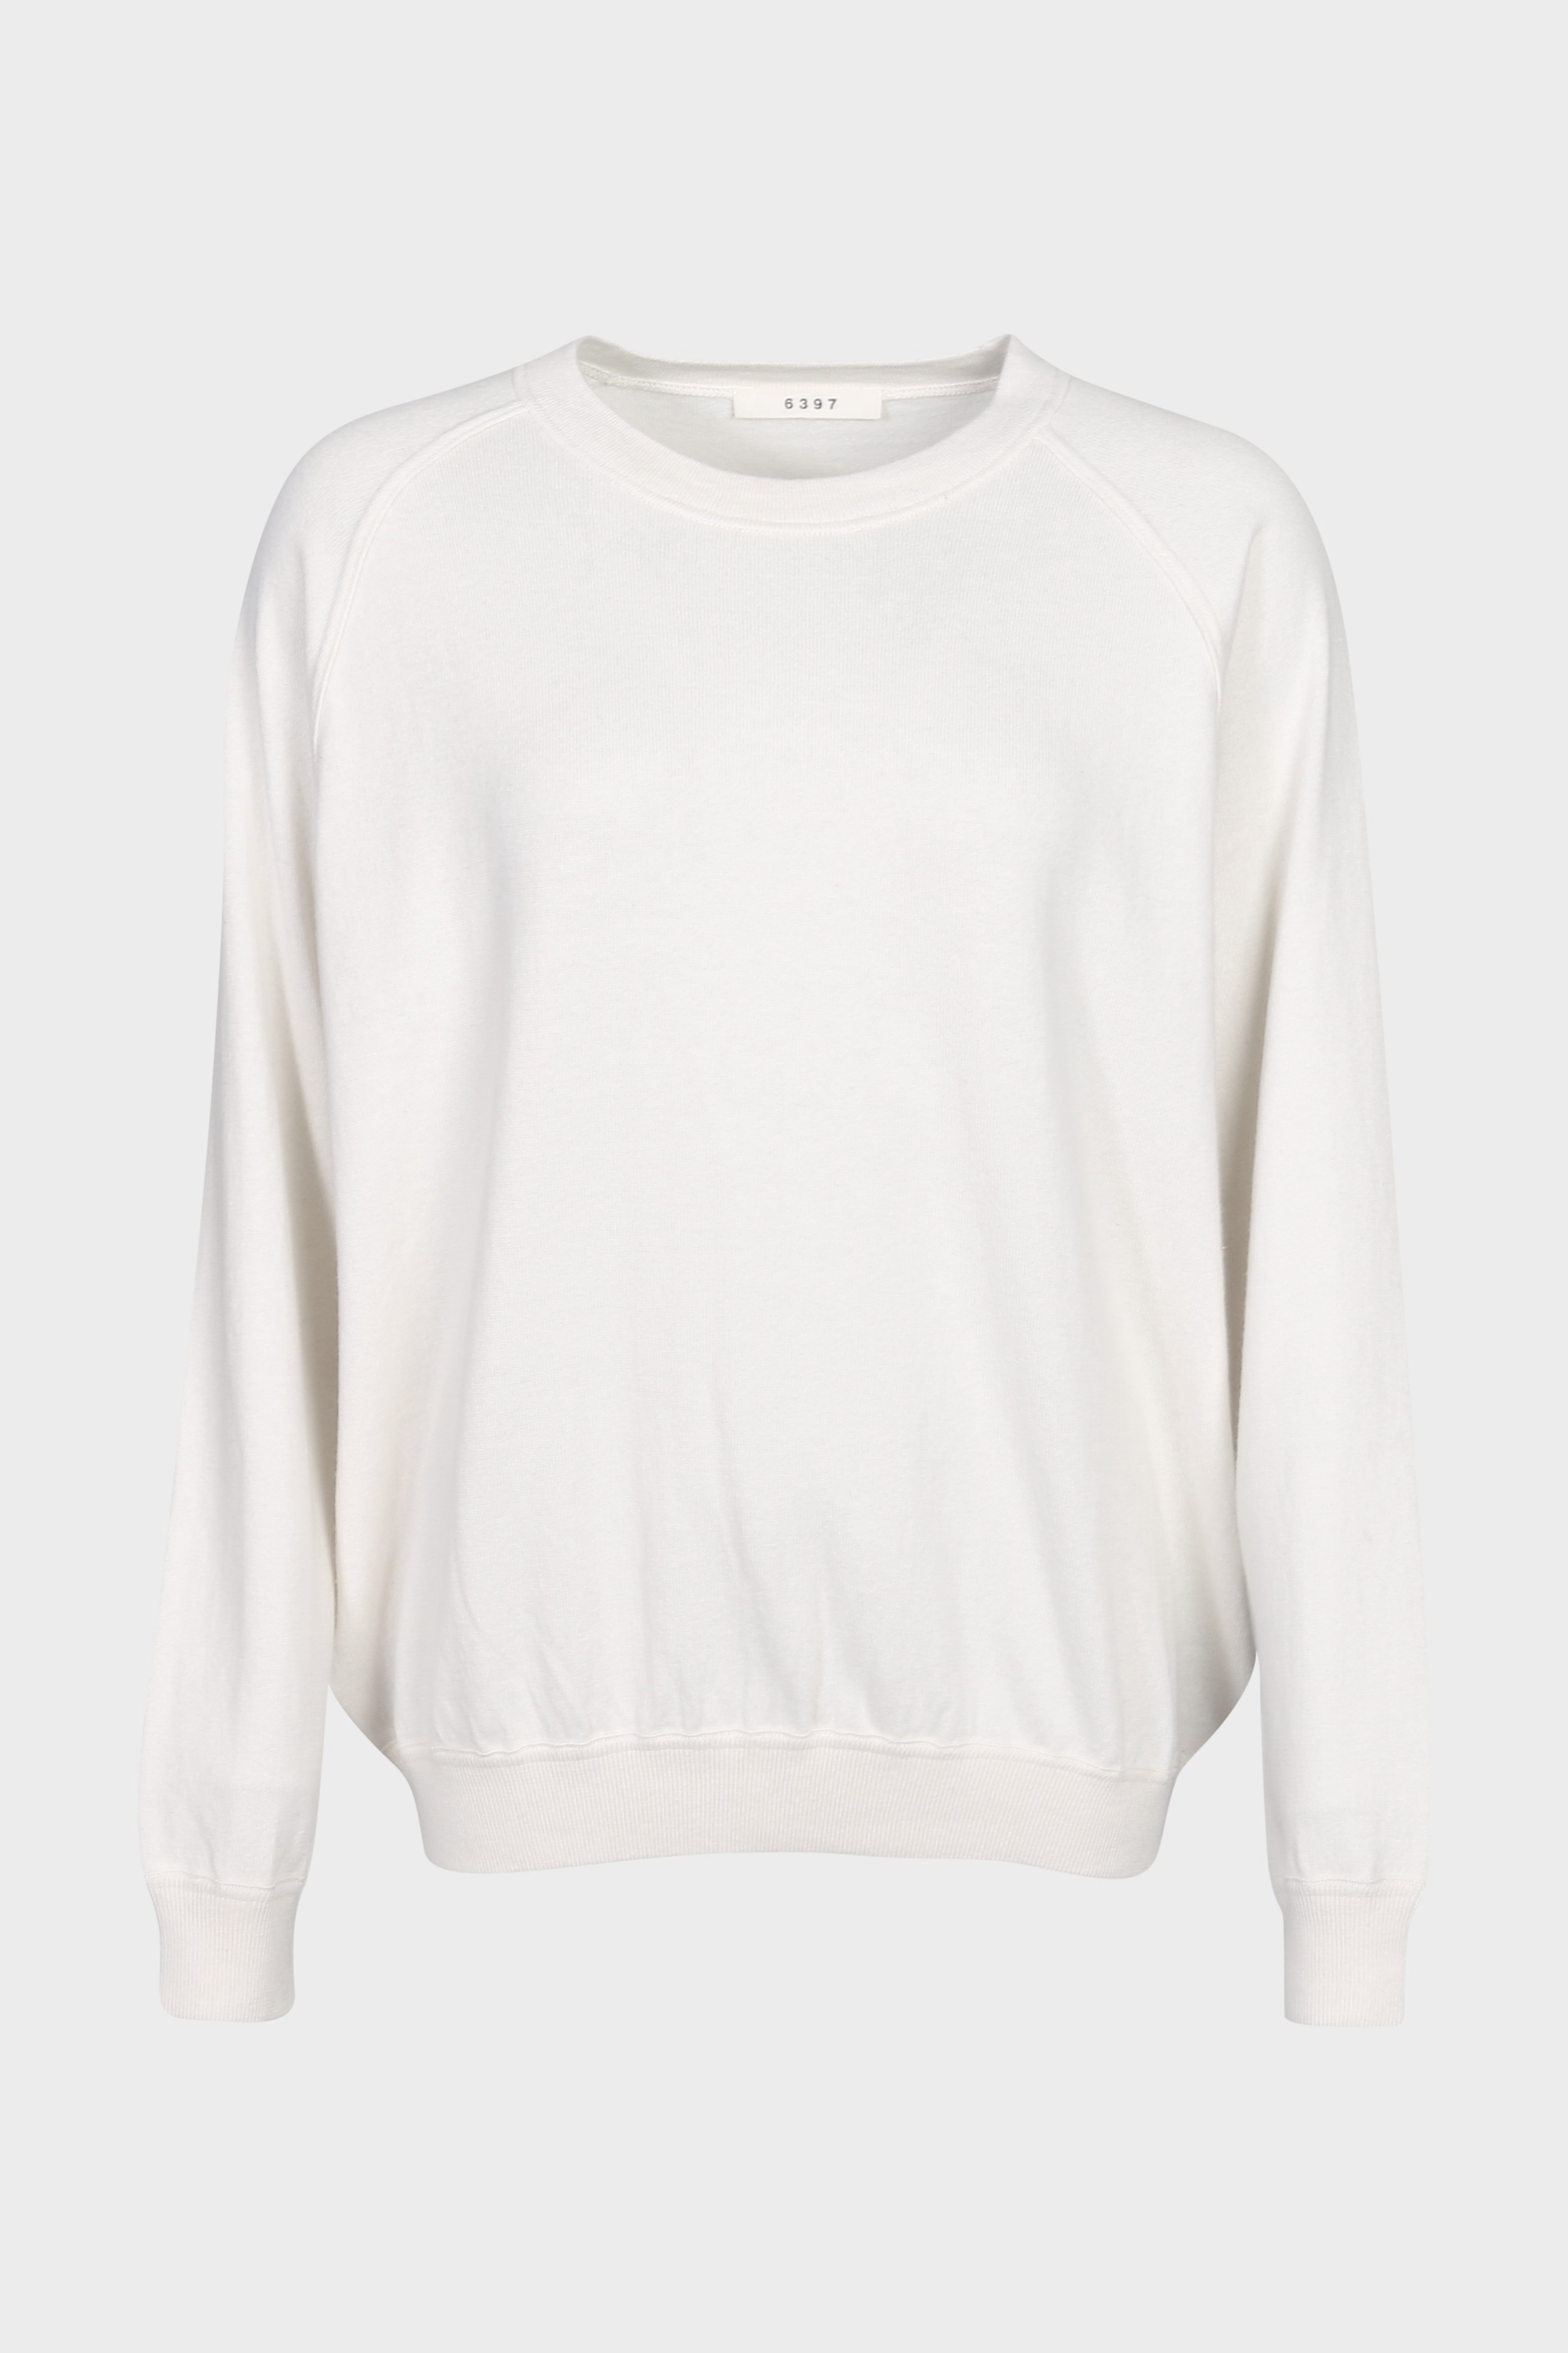 6397 Knit Pullover in Ivory M